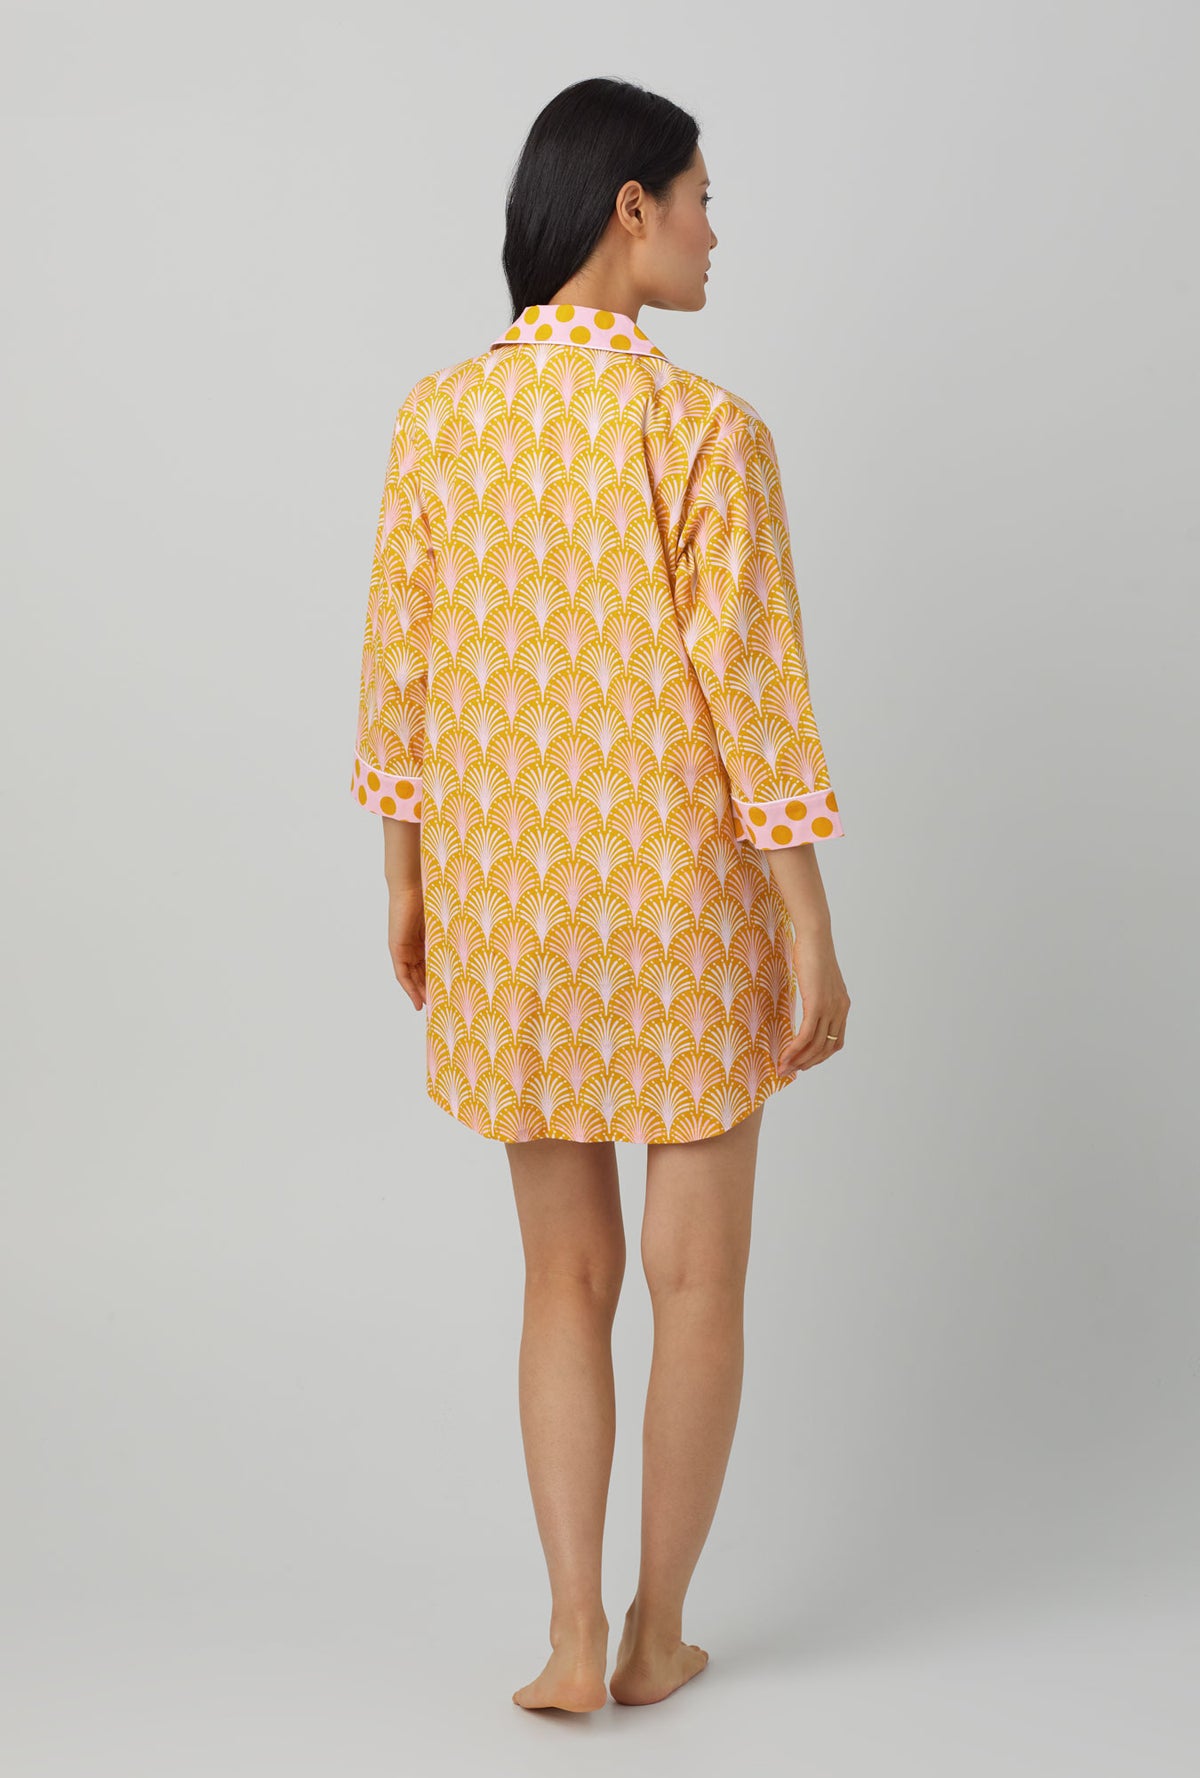 A lady wearing 3/4 sleeve classic woven cotton poplin sleepshirt with suite life print